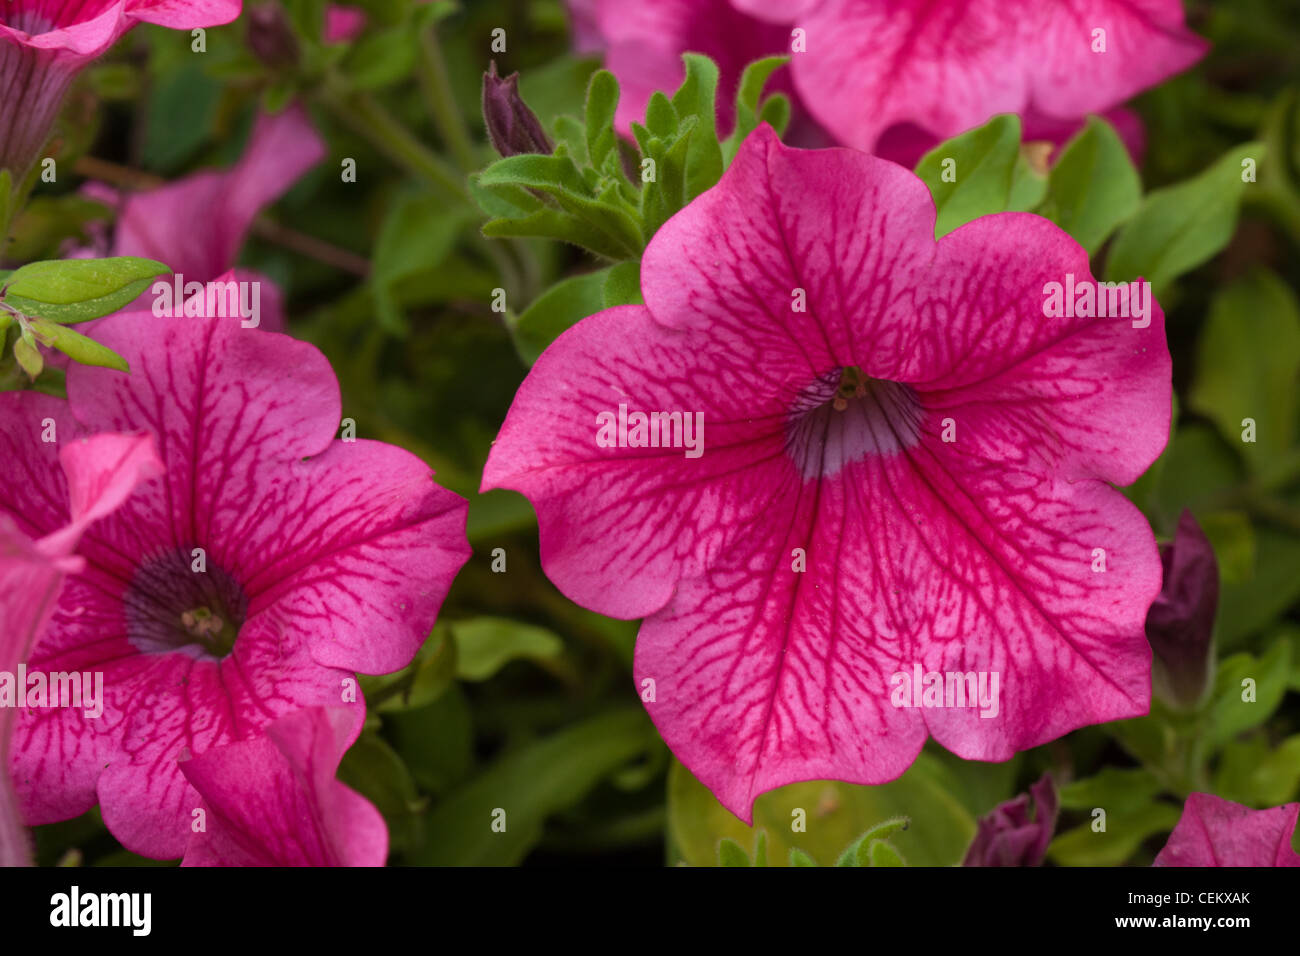 Pink Lavatera flower in green nature Stock Photo - Alamy